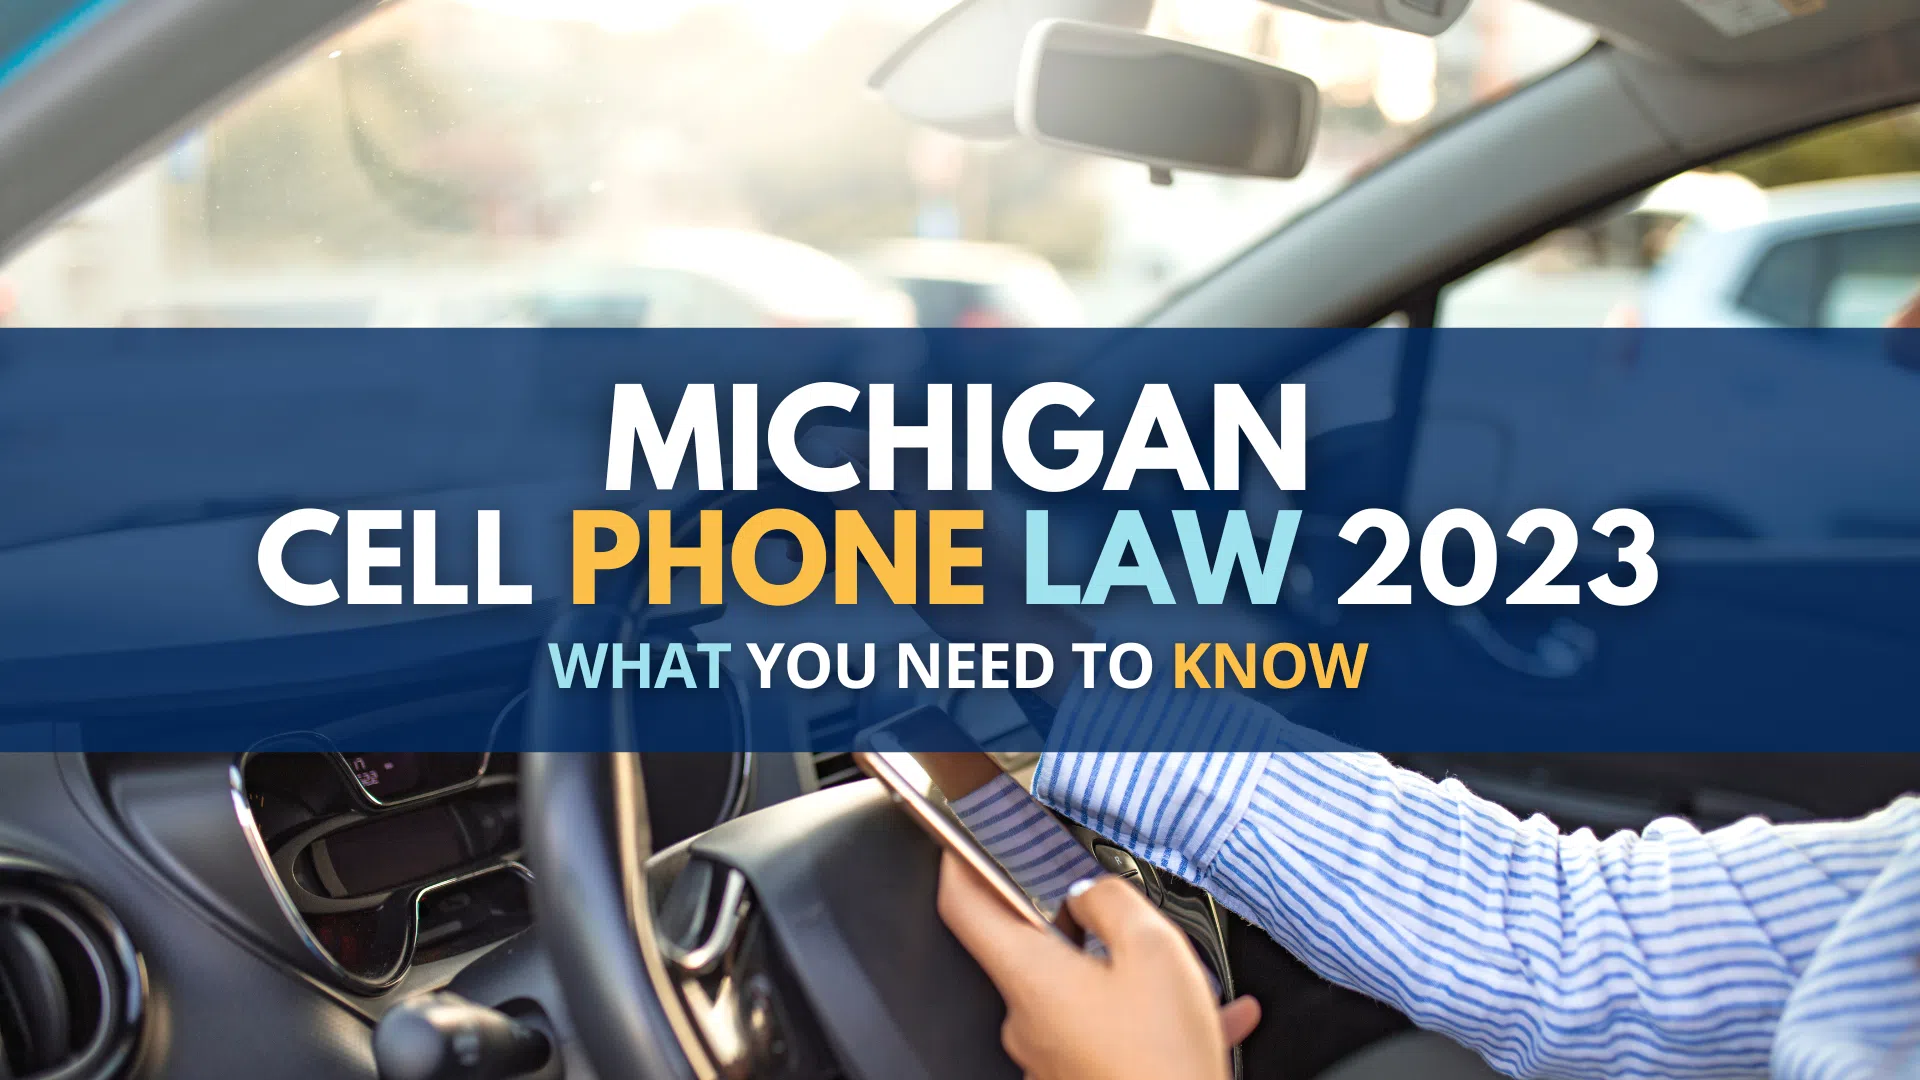 Michigan Cell Phone Law 2023: What you need to know.